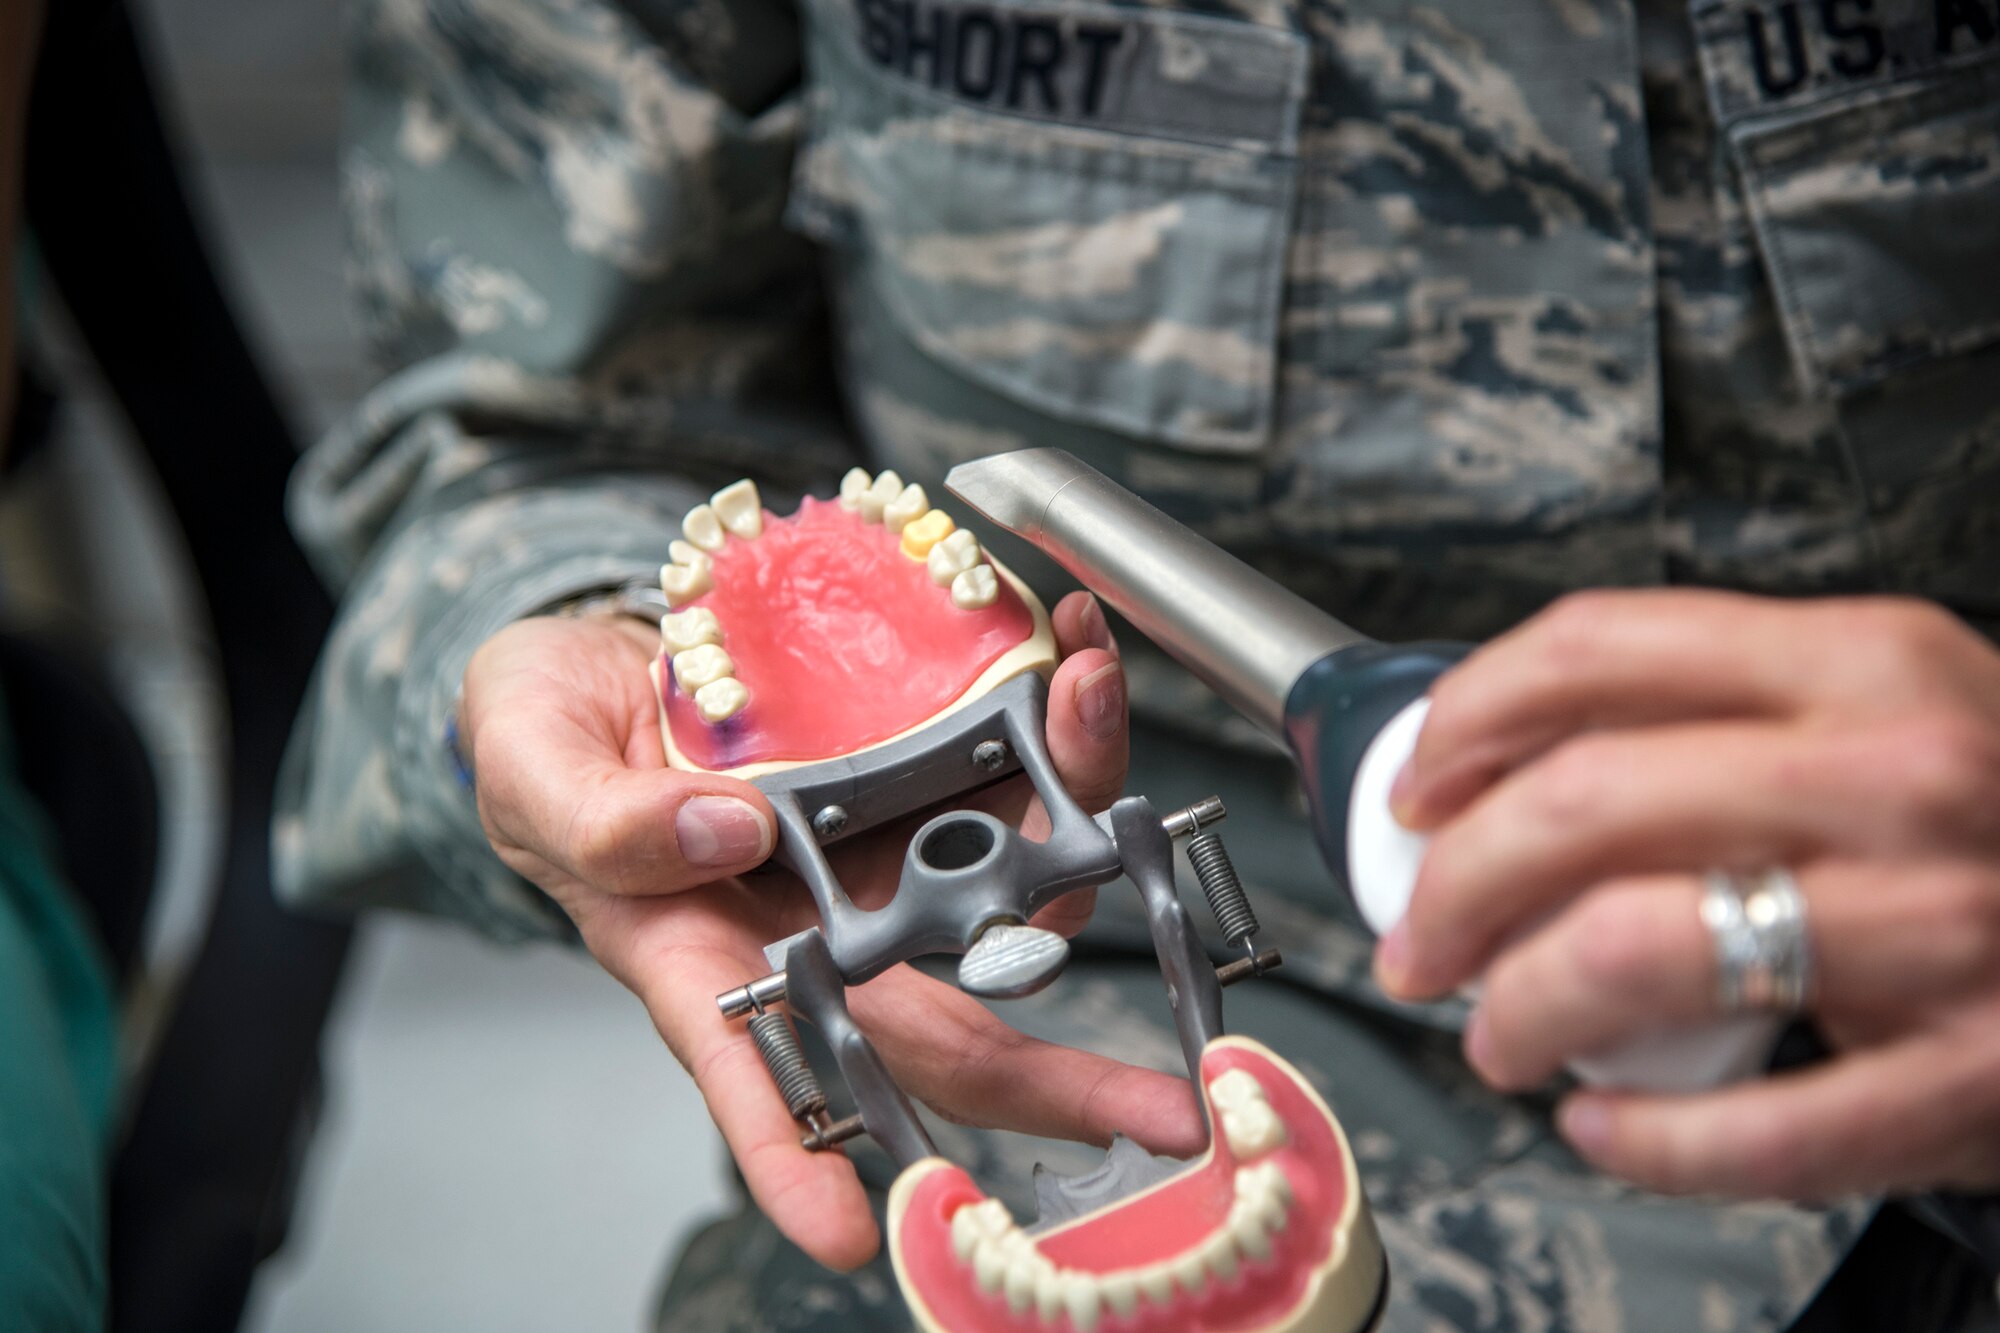 Col. Jennifer Short, 23d Wing commander, flashes a light on a jaw model, April 30, 2018, at Moody Air Force Base, Ga. Short toured the 23d Medical Group (MDG) to gain a better understanding of their overall mission, capabilities, and comprehensive duties, and was able to experience the day-to-day operations of the various units within the 23d MDG, ranging from bioenvironmental to ambulatory care. (U.S. Air Force photo by Airman 1st Class Eugene Oliver)